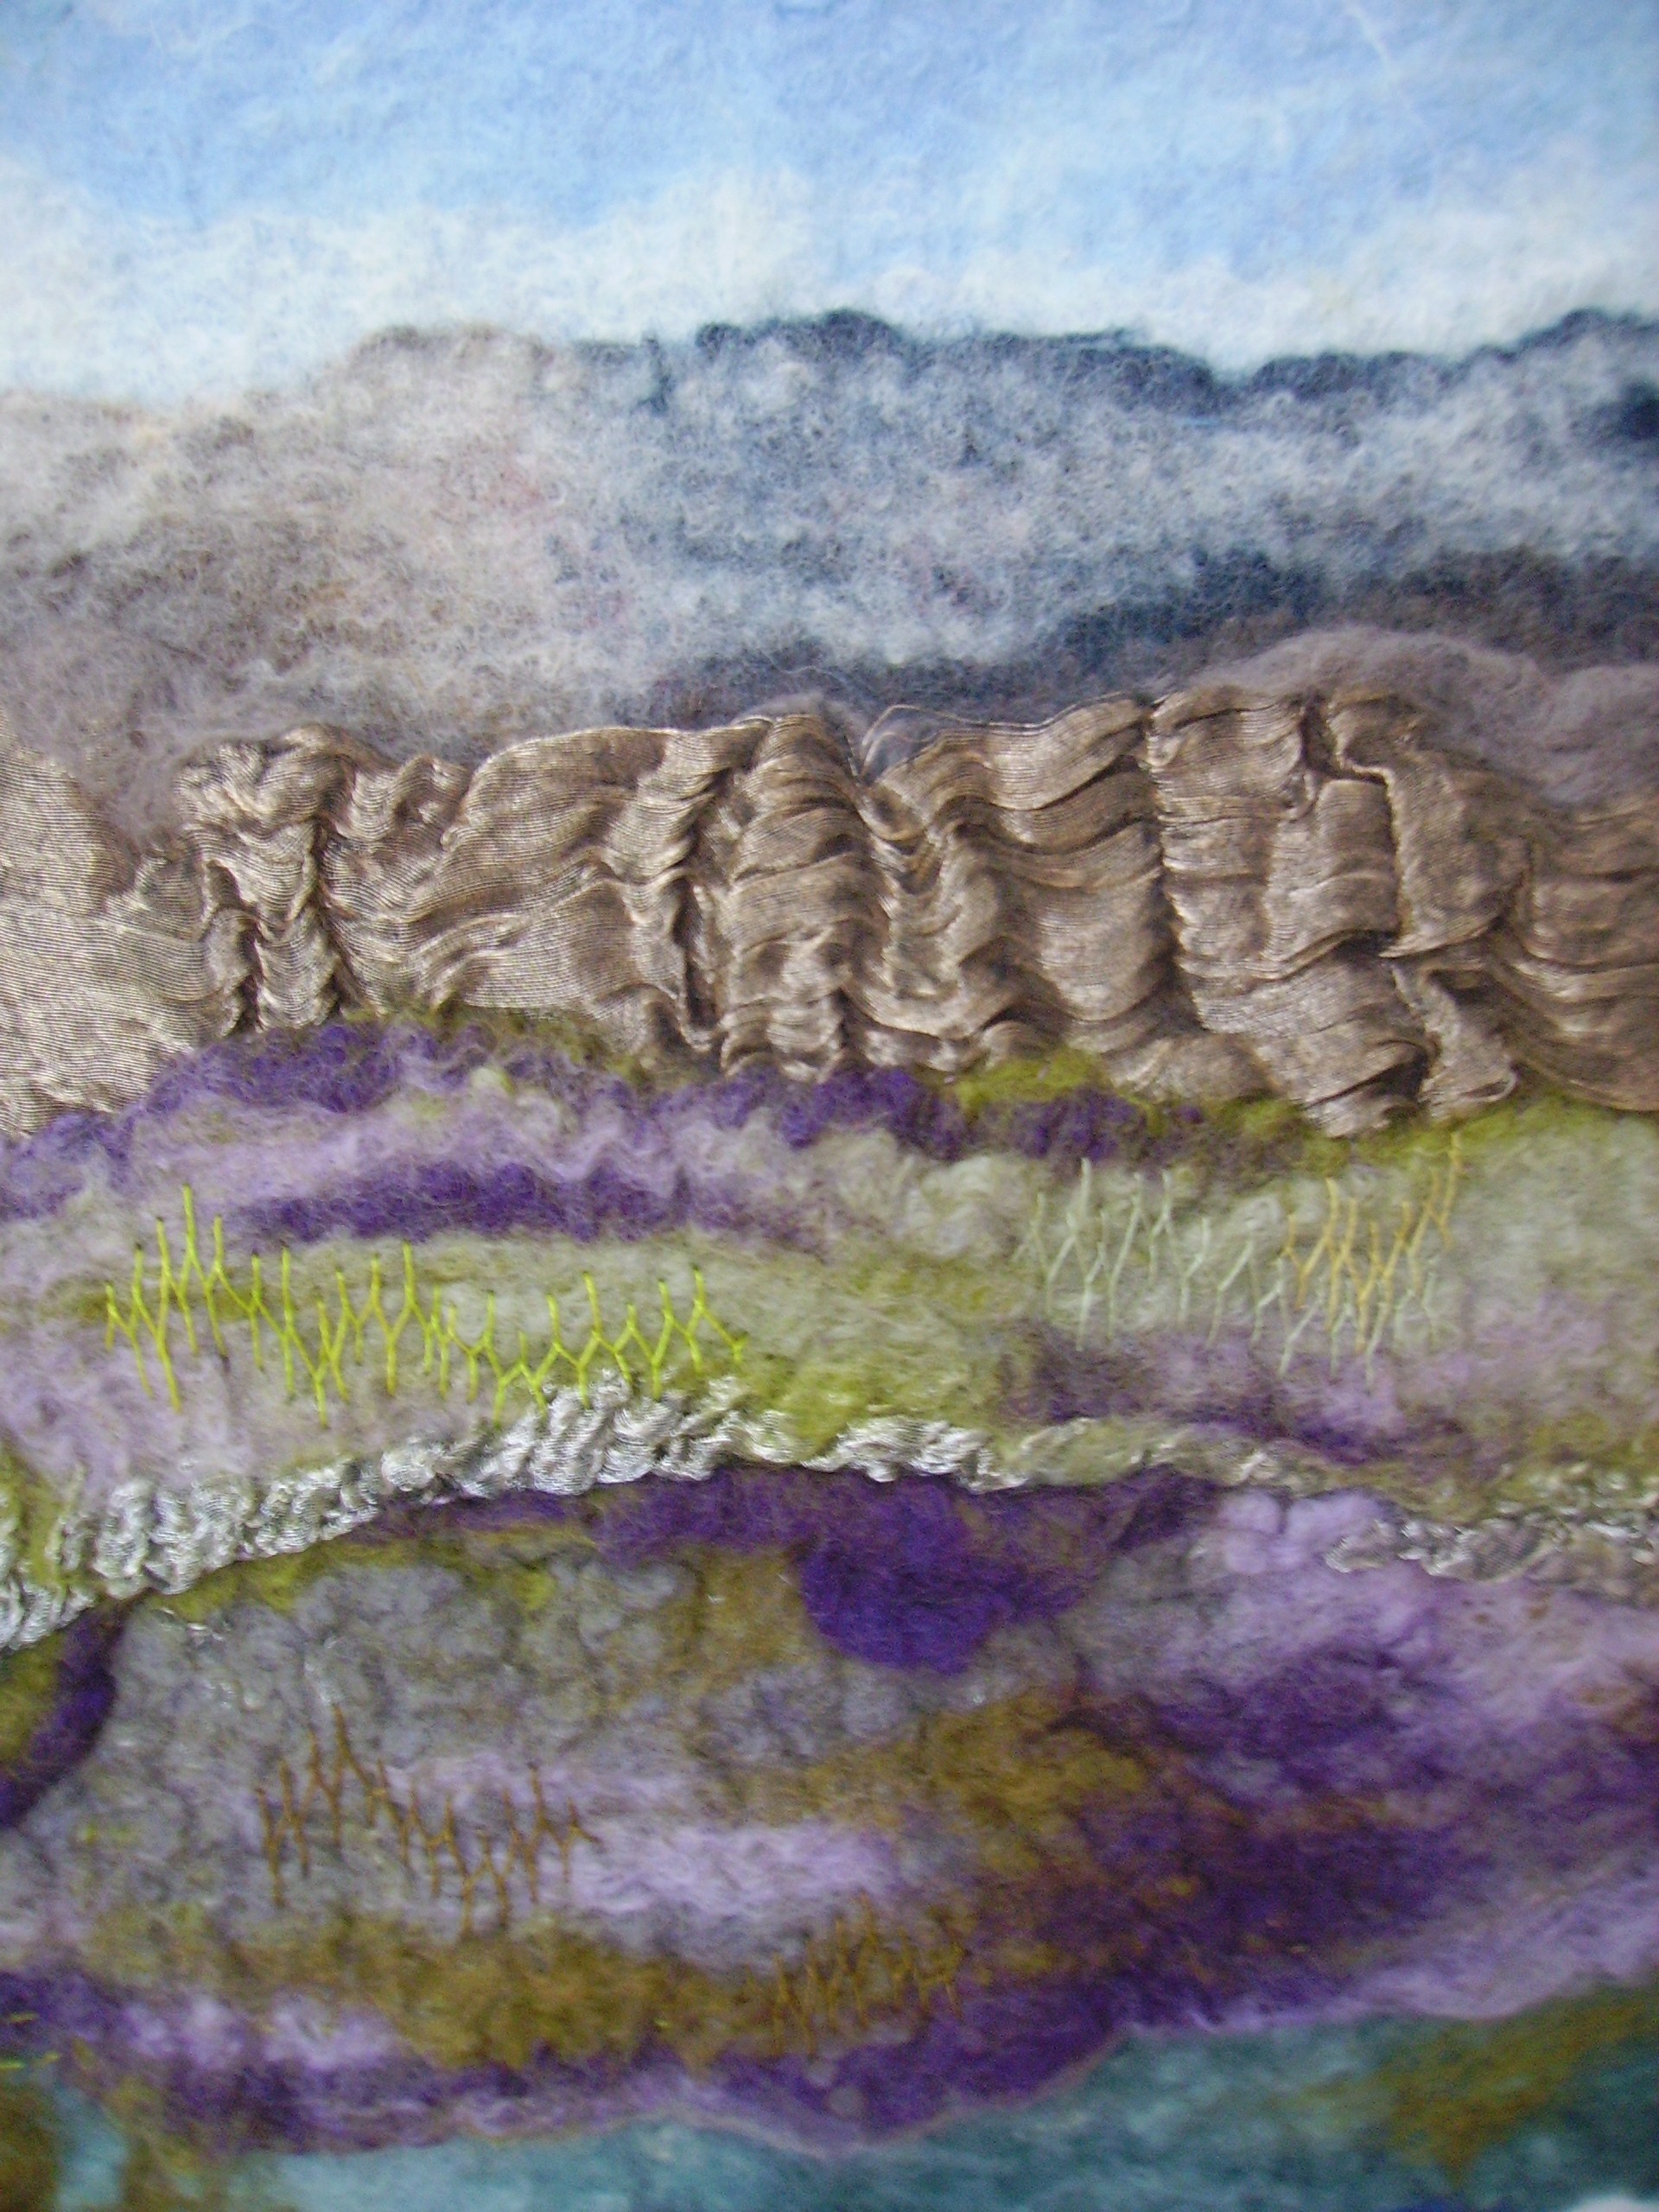 Hand felted and embroidered manipulated wool